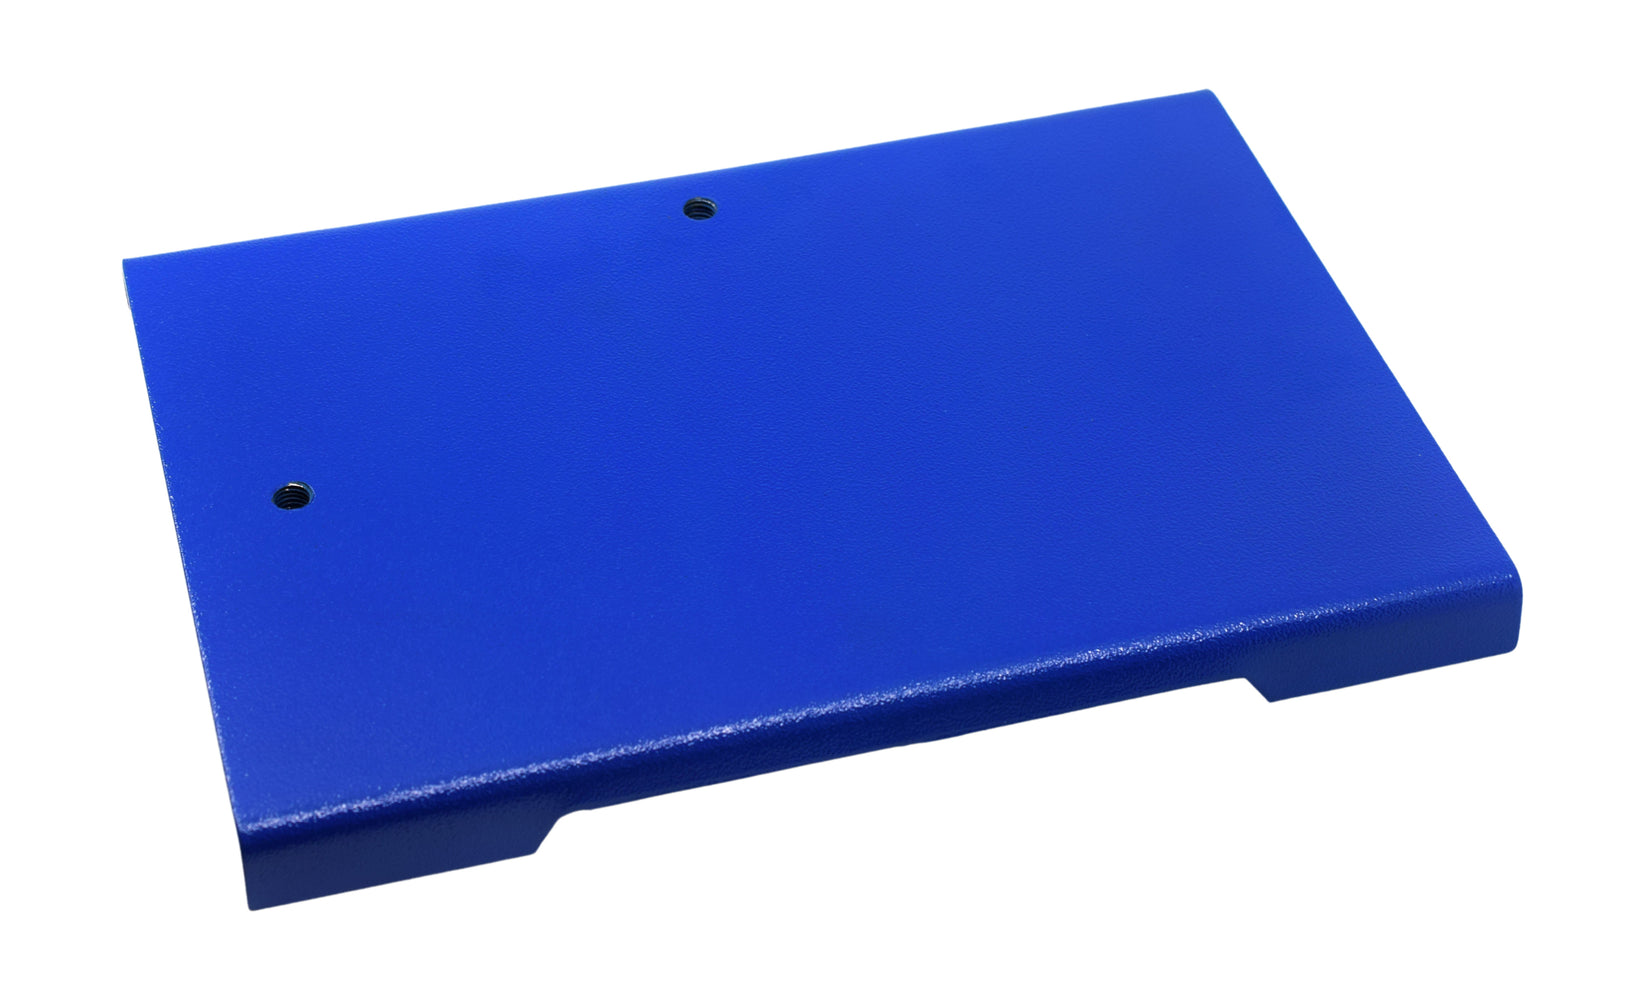 Rectangular Retort Base, 12.5"x8" - Two Perpendicular Threaded Holes for Rods - Heavy Duty, Corrosion Resistant Steel